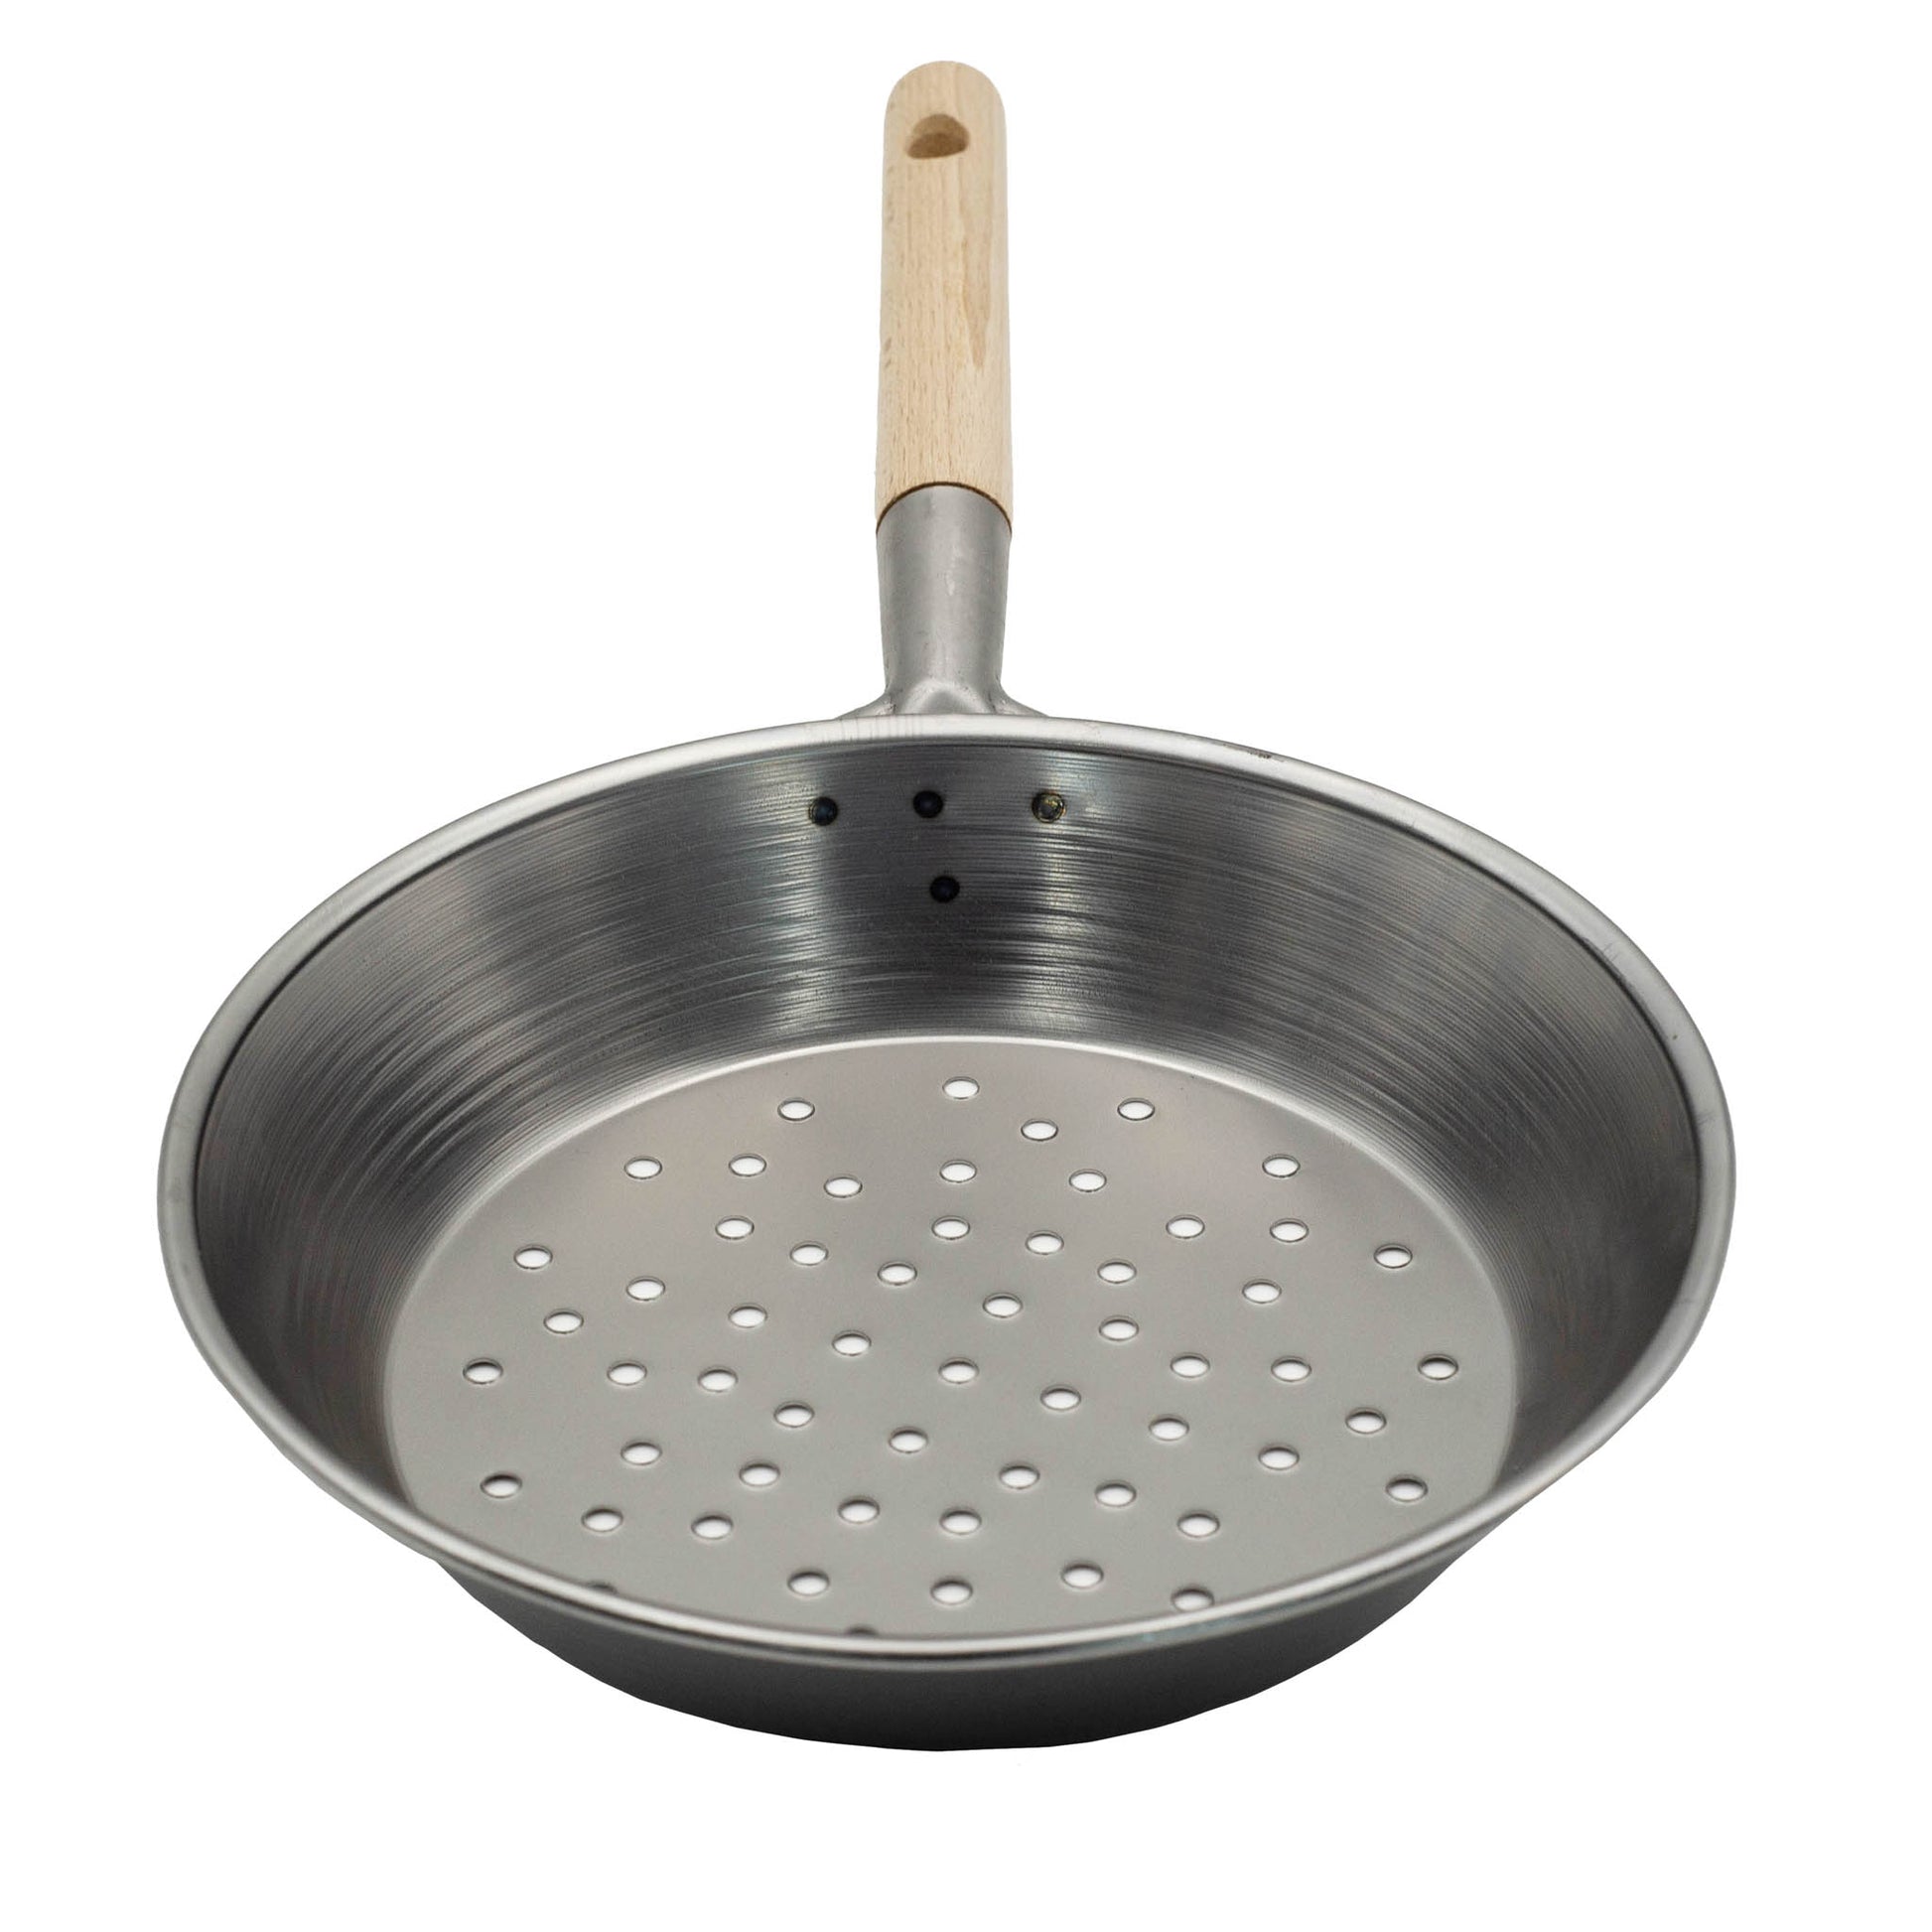 Chestnut roasting pan, 30cm with perforated metal base and wooden handle